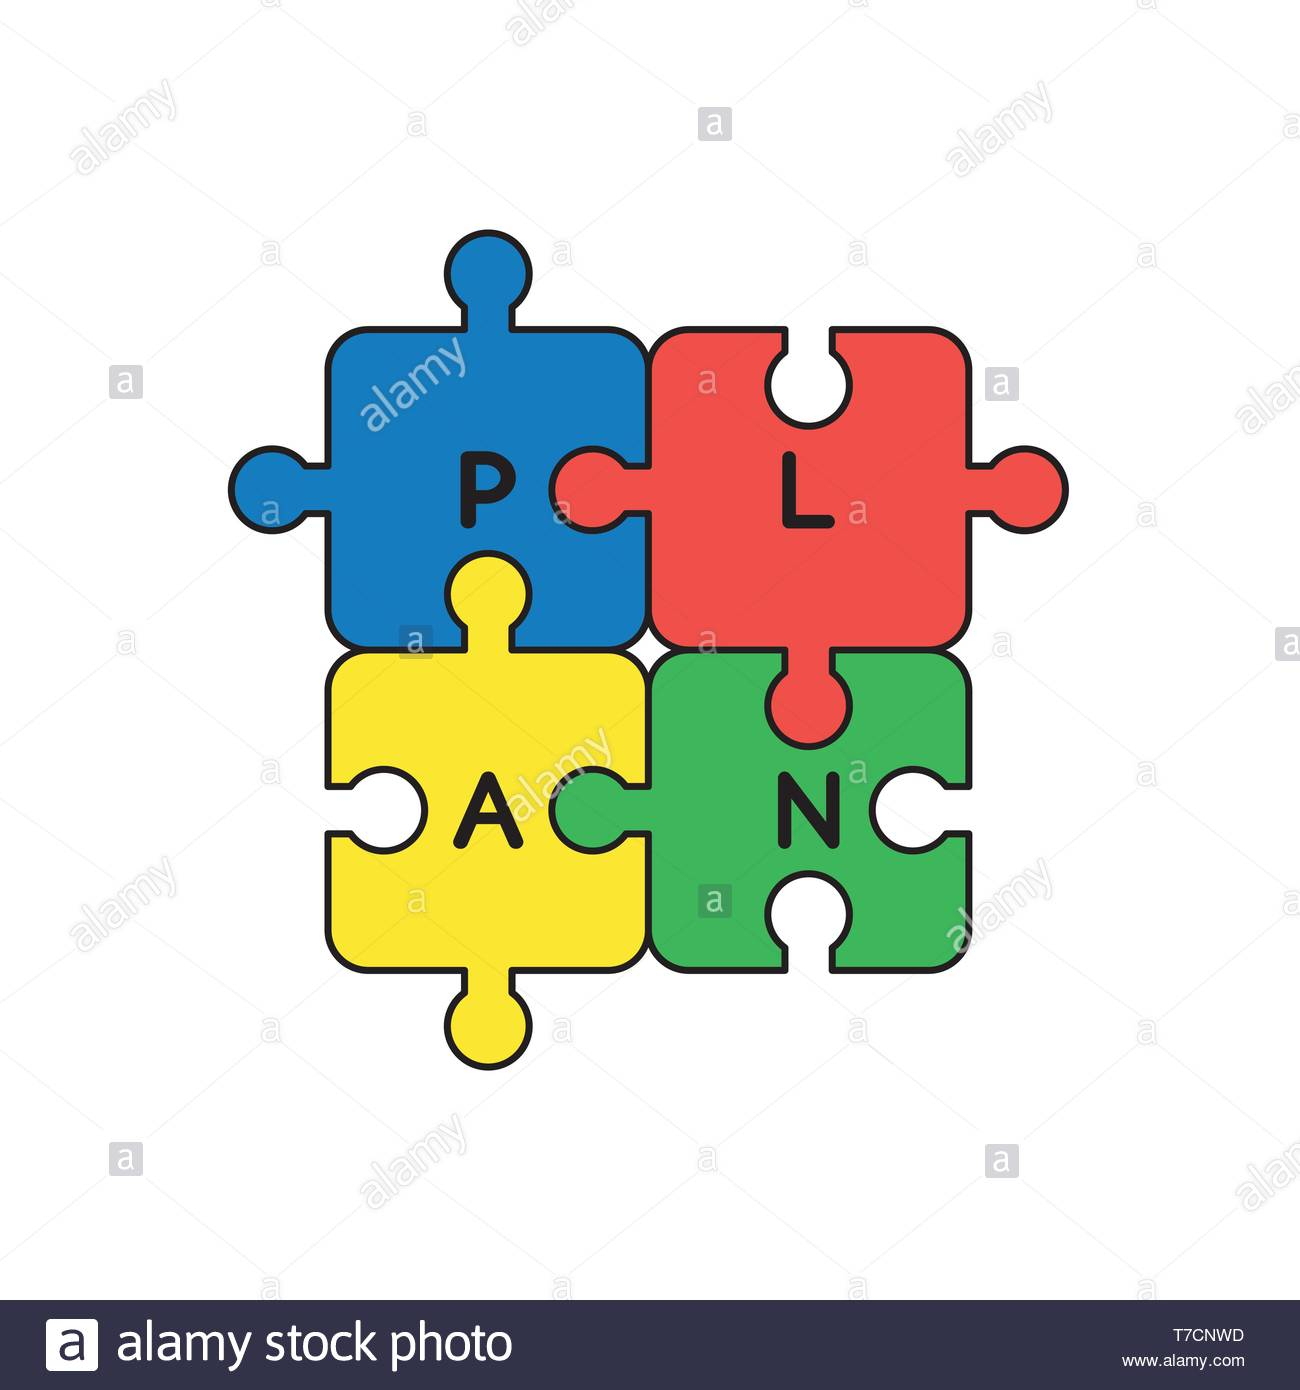 Vector Icon Concept Of Four Part Jigsaw Puzzle Pieces With Intended For Jigsaw Puzzle Template For Word